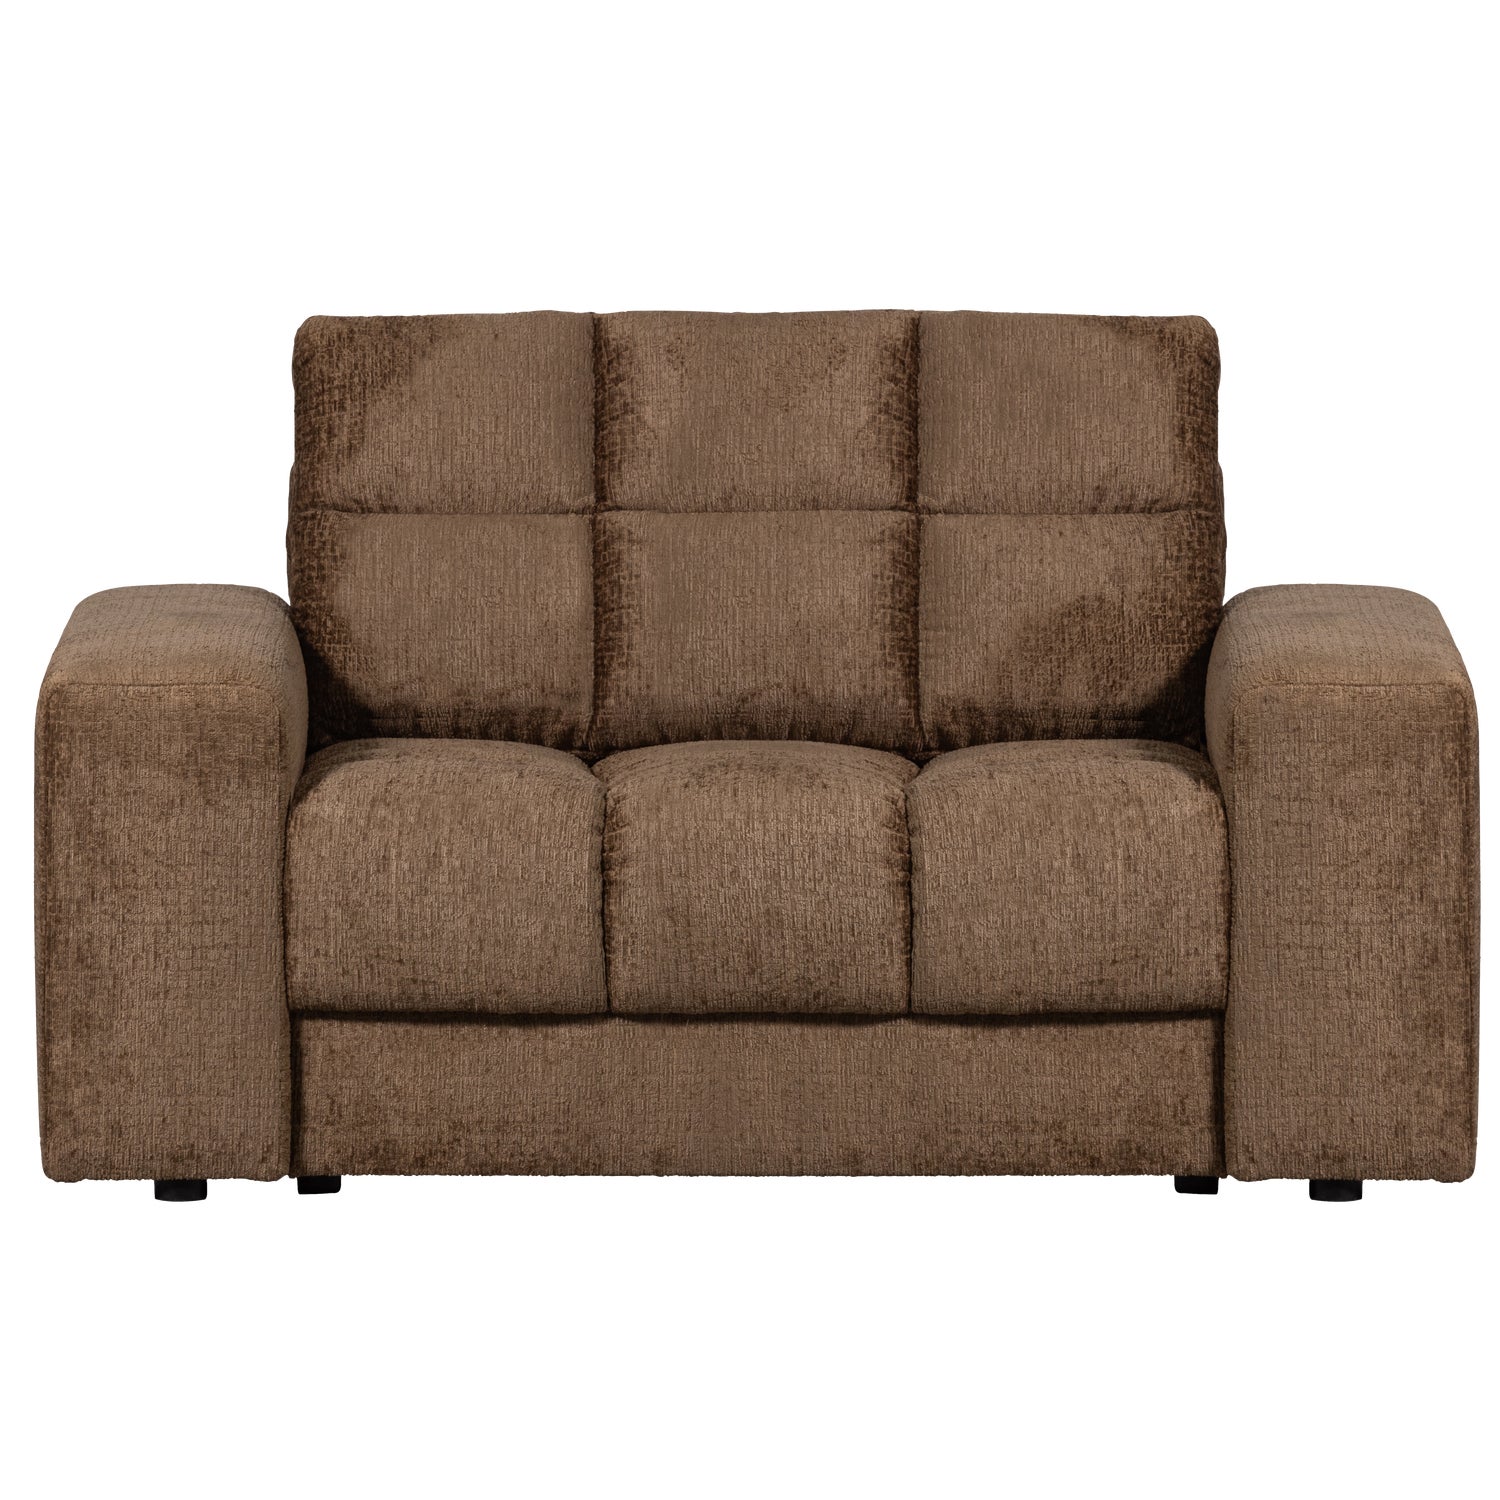 379006-BR-01_VS_WE_second_date_loveseat_structure_velvet_brass.png?auto=webp&format=png&width=1500&height=1500